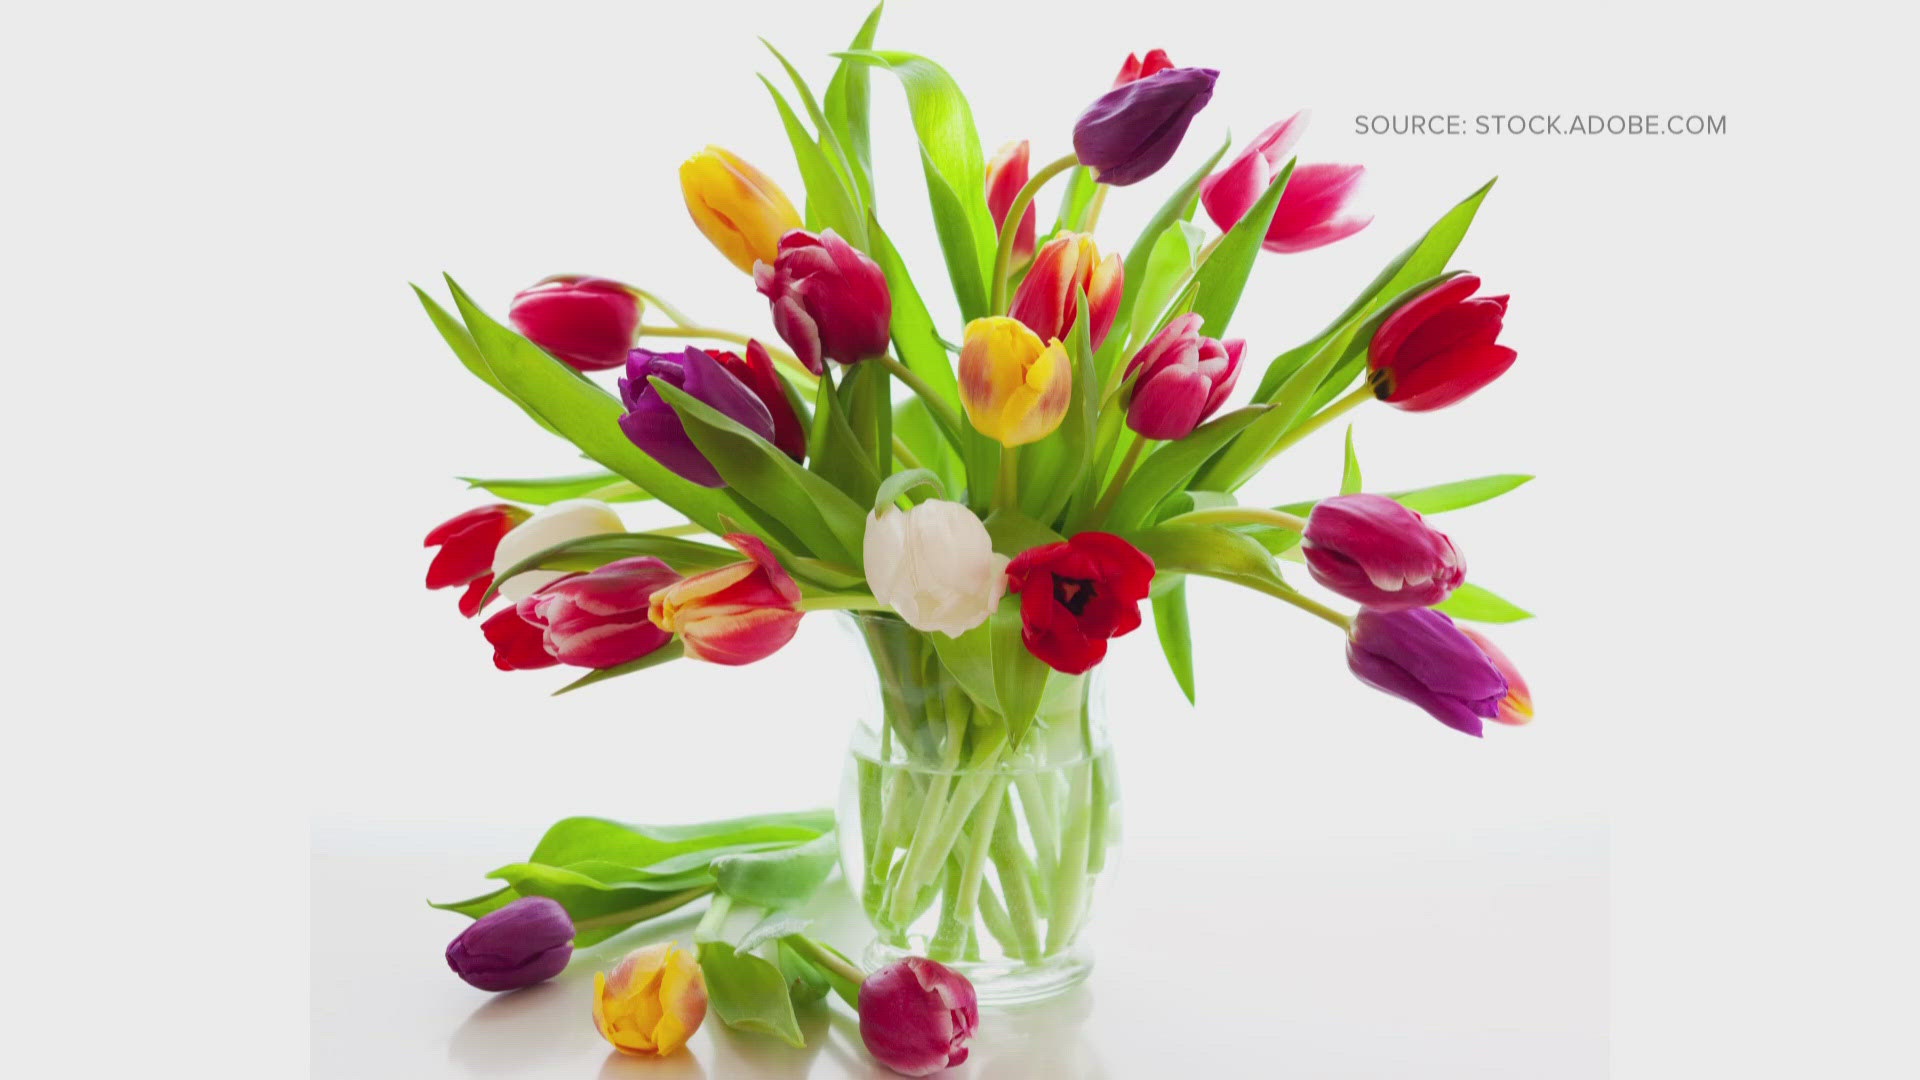 2WTK shares tips on how to keep your Mother's Day Flowers alive longer.